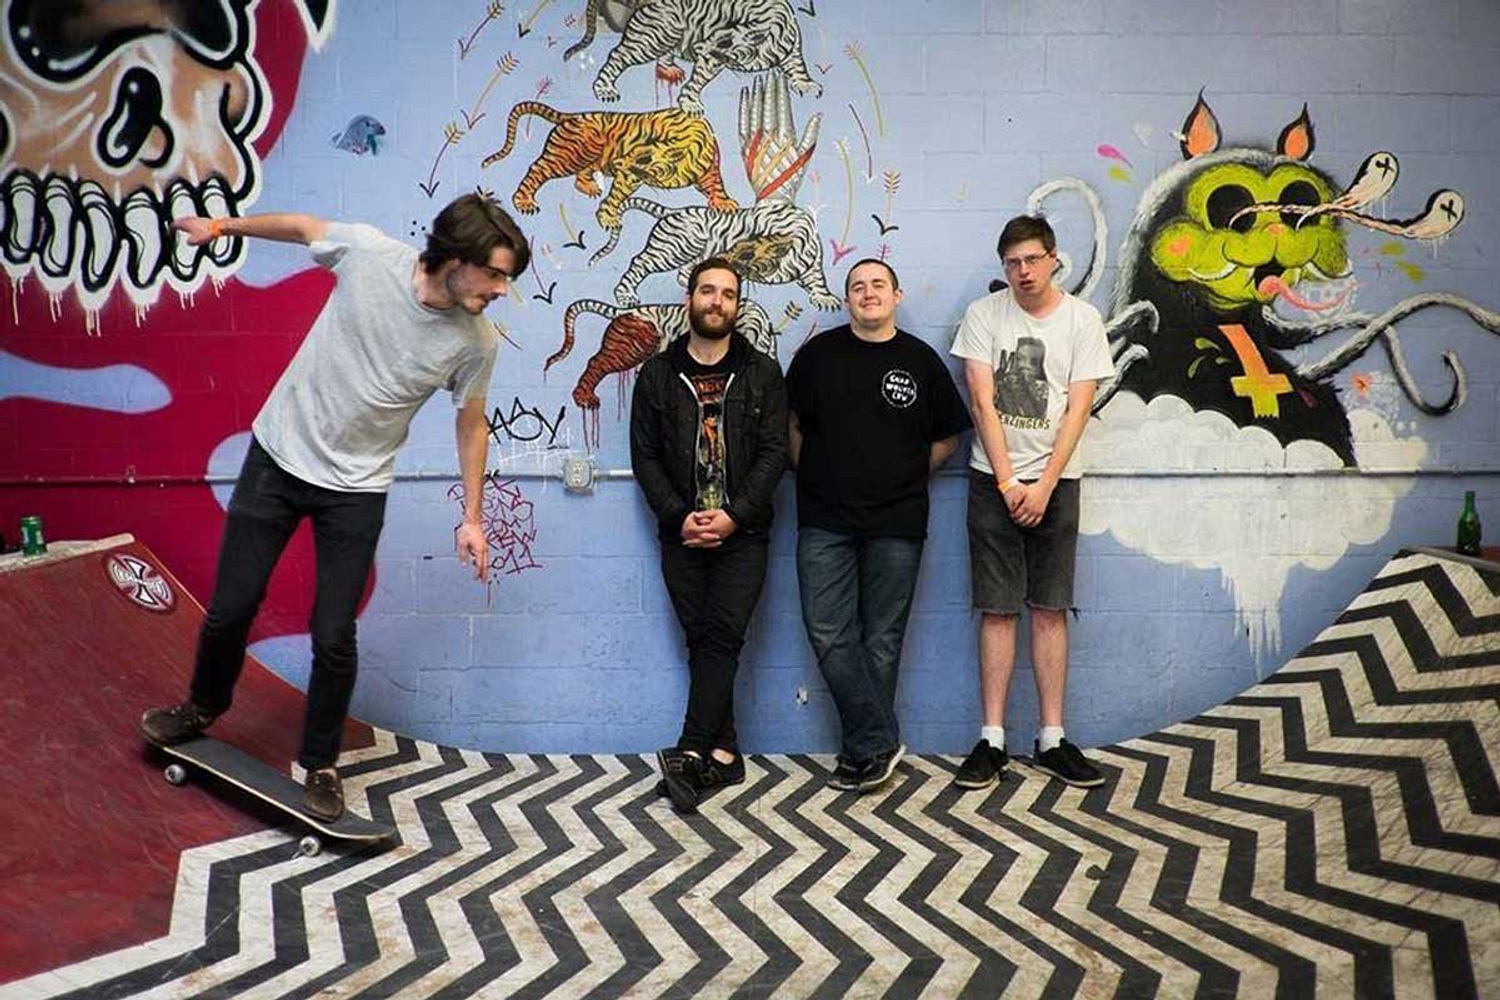 Modern Baseball: "This is just a fucking band, we can do what we want with it"